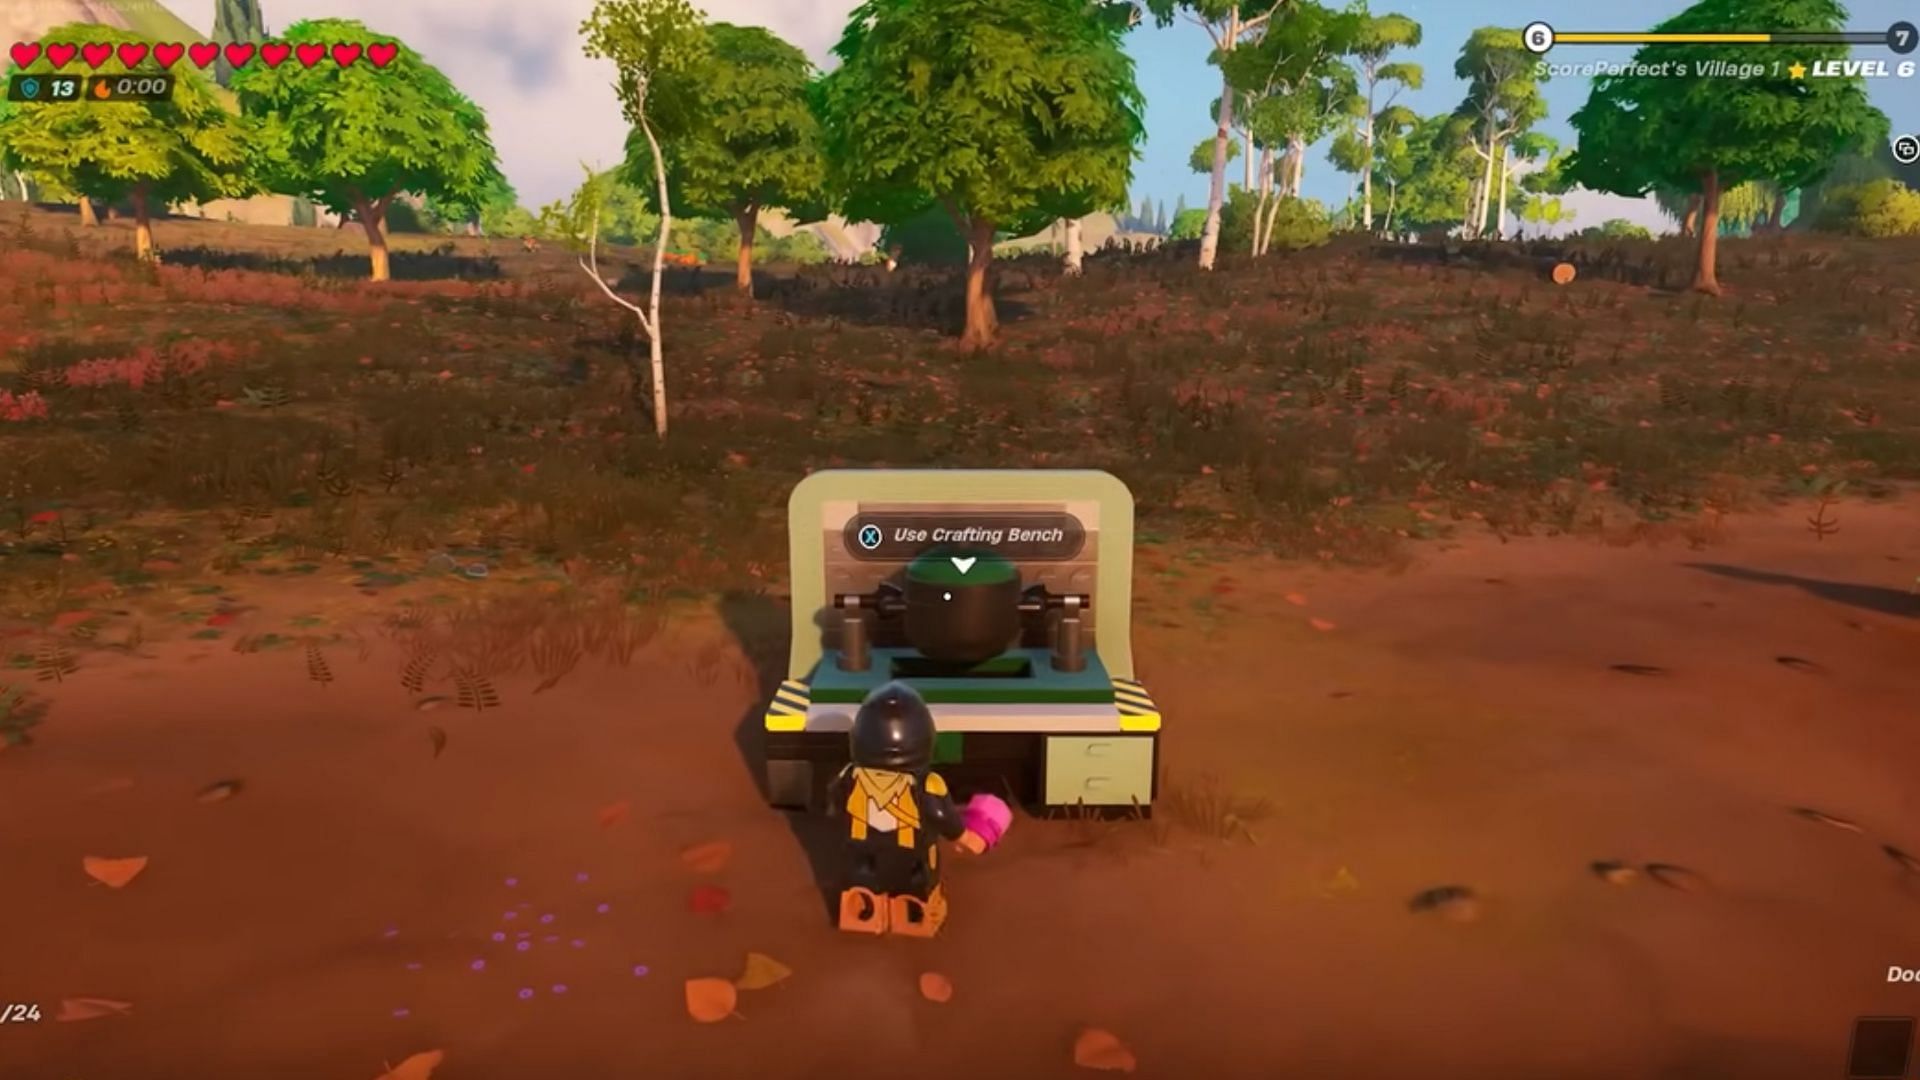 Upgrade your Crafting Bench within LEGO Fortnite